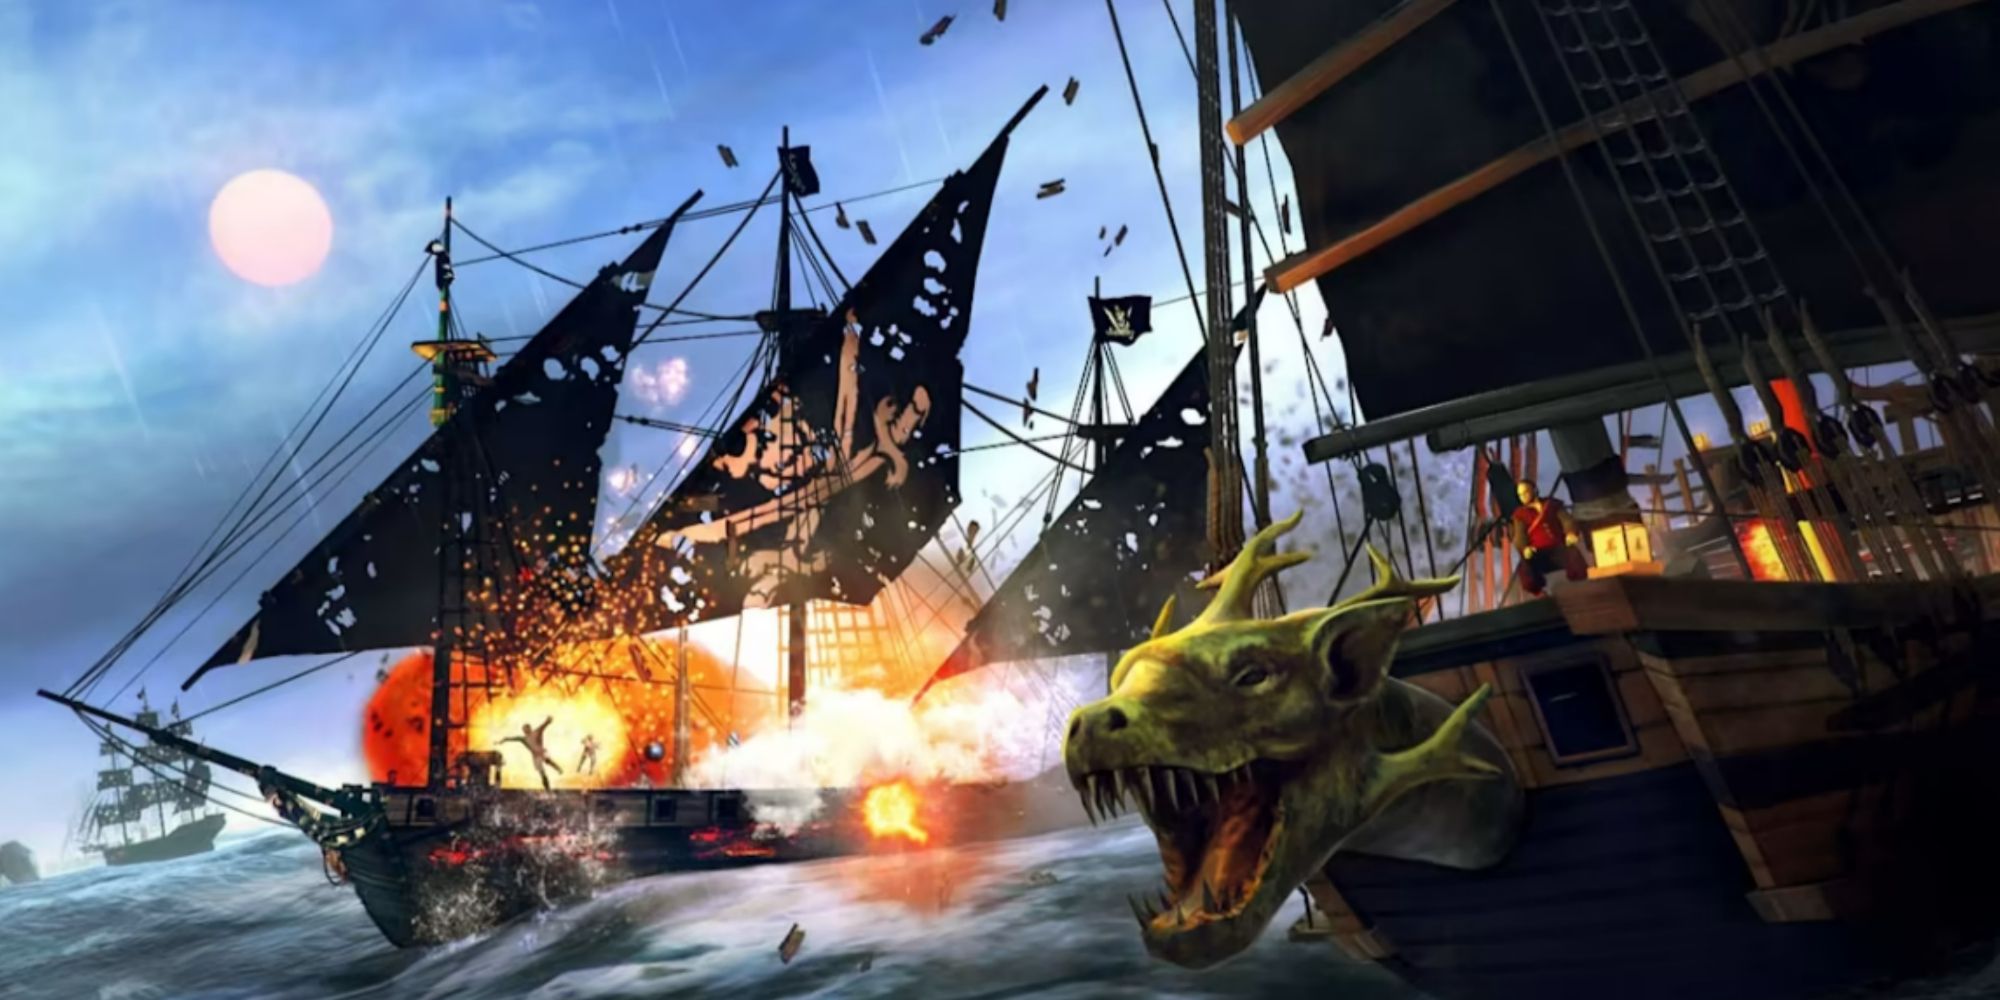 two pirate ships battling in under the jolly roger